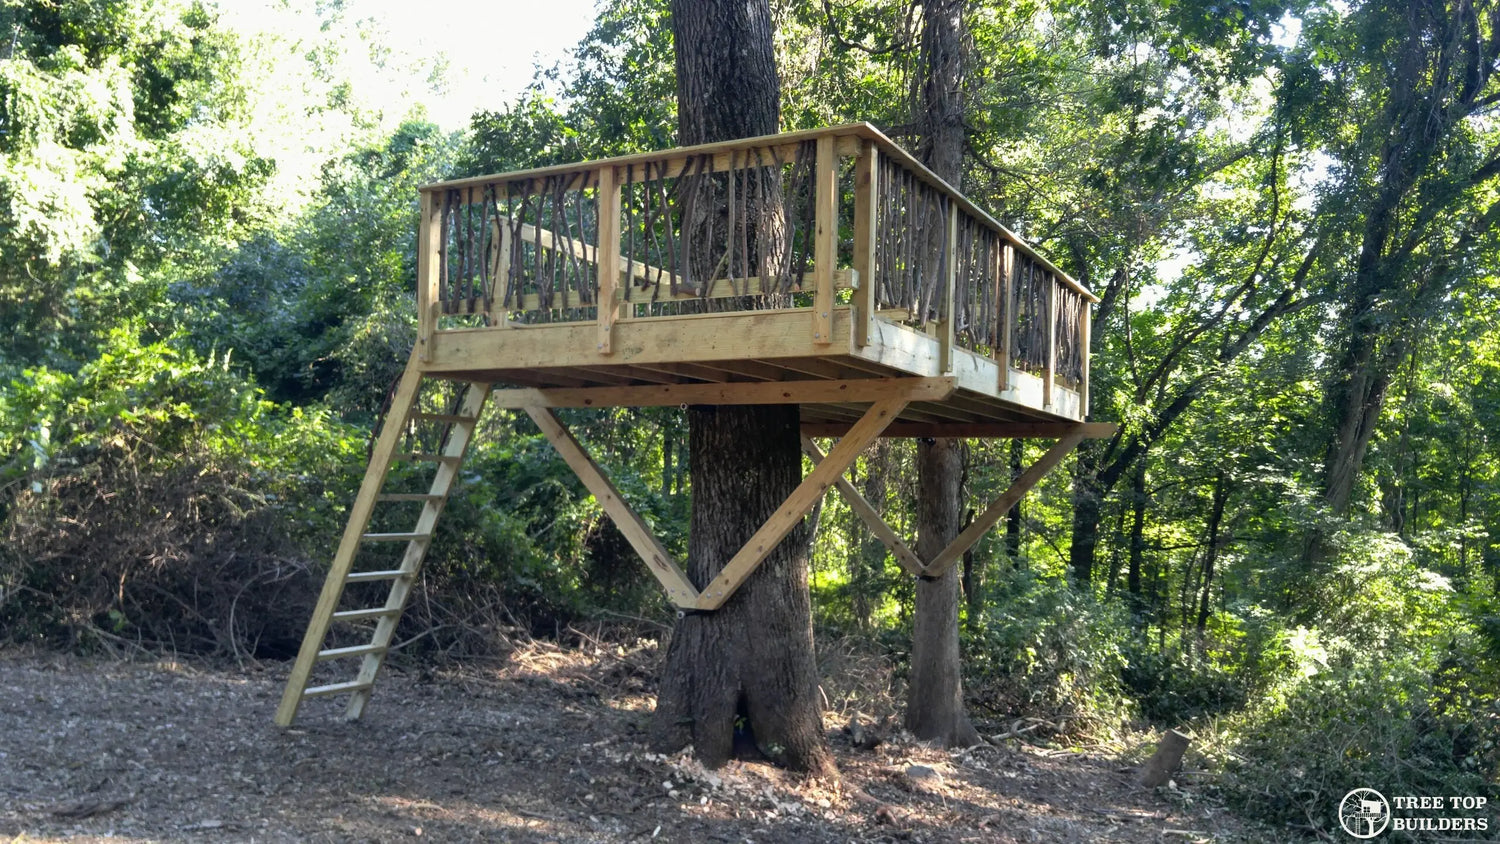 1 - Connecticut Treehouse